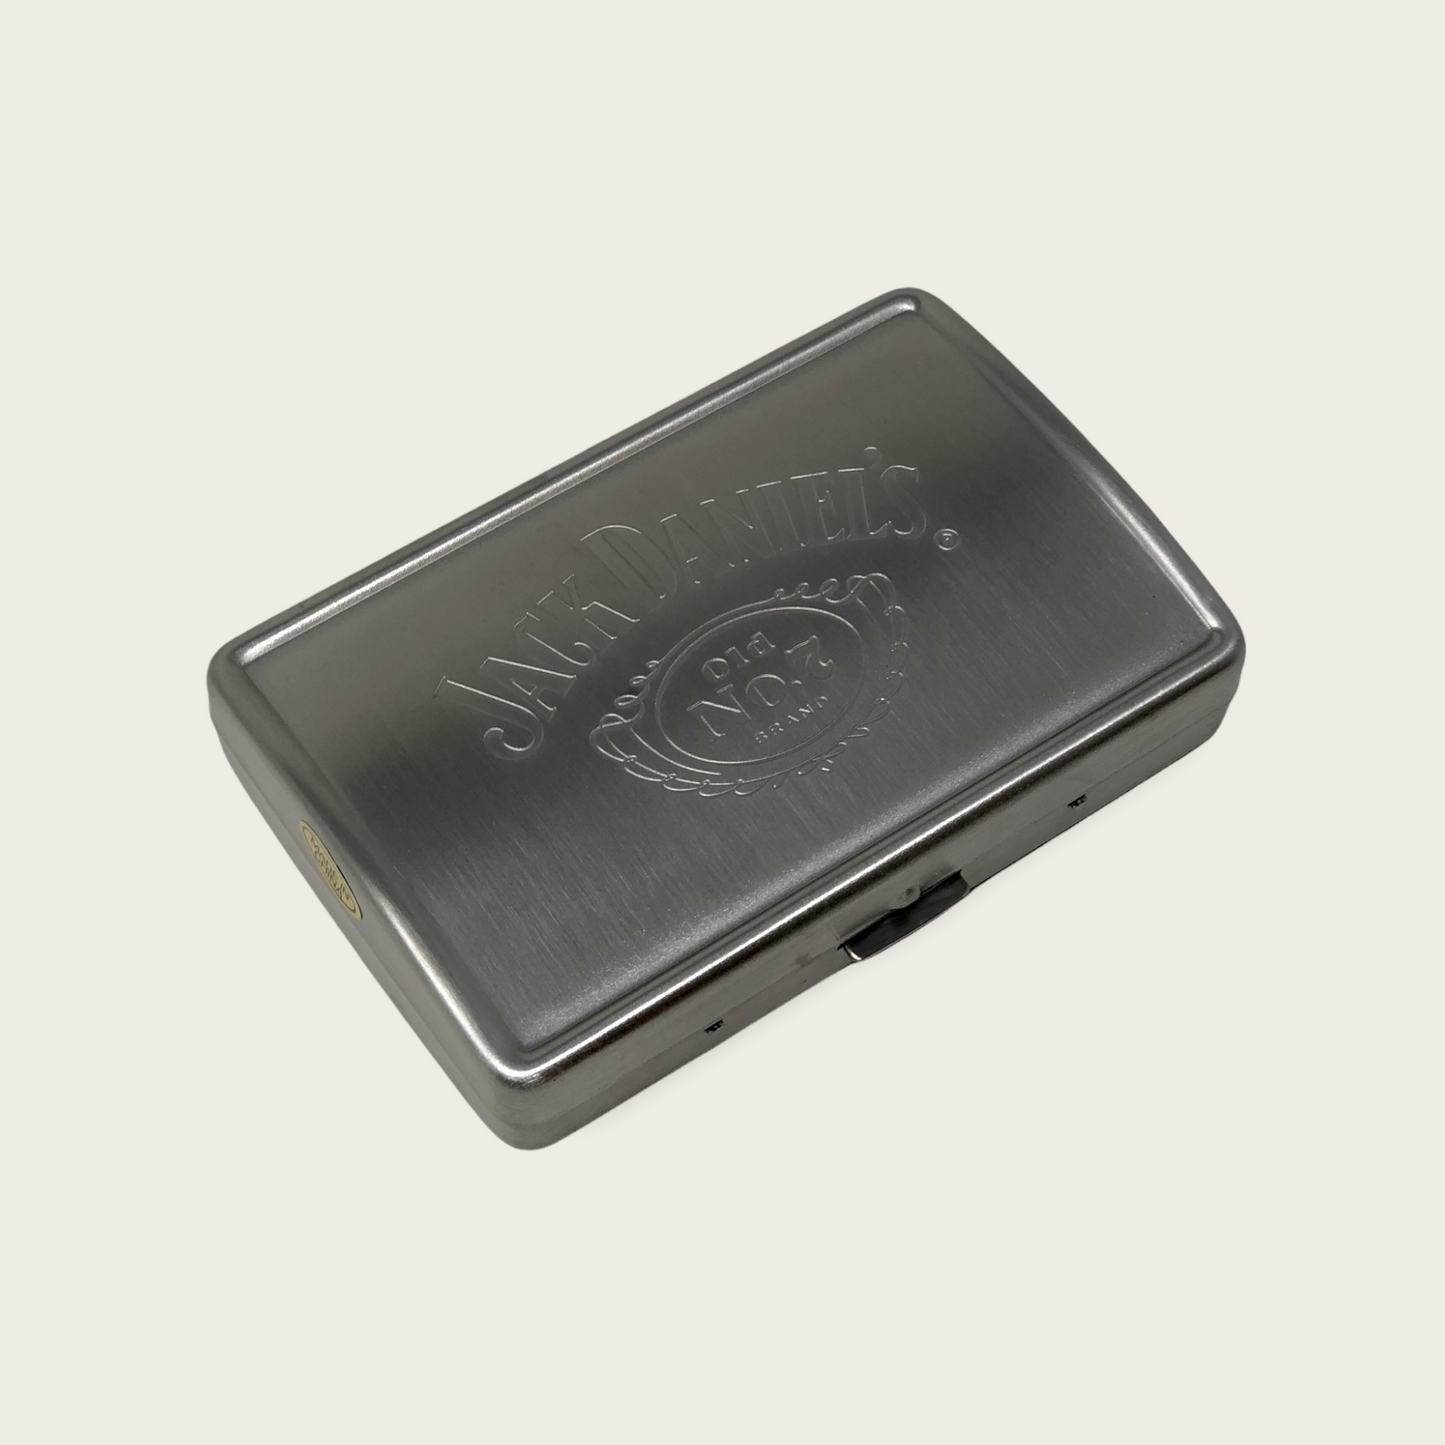 Jack Daniel's 0.7mm Gauge Carry Case - Stainless Steel - Licensed Product